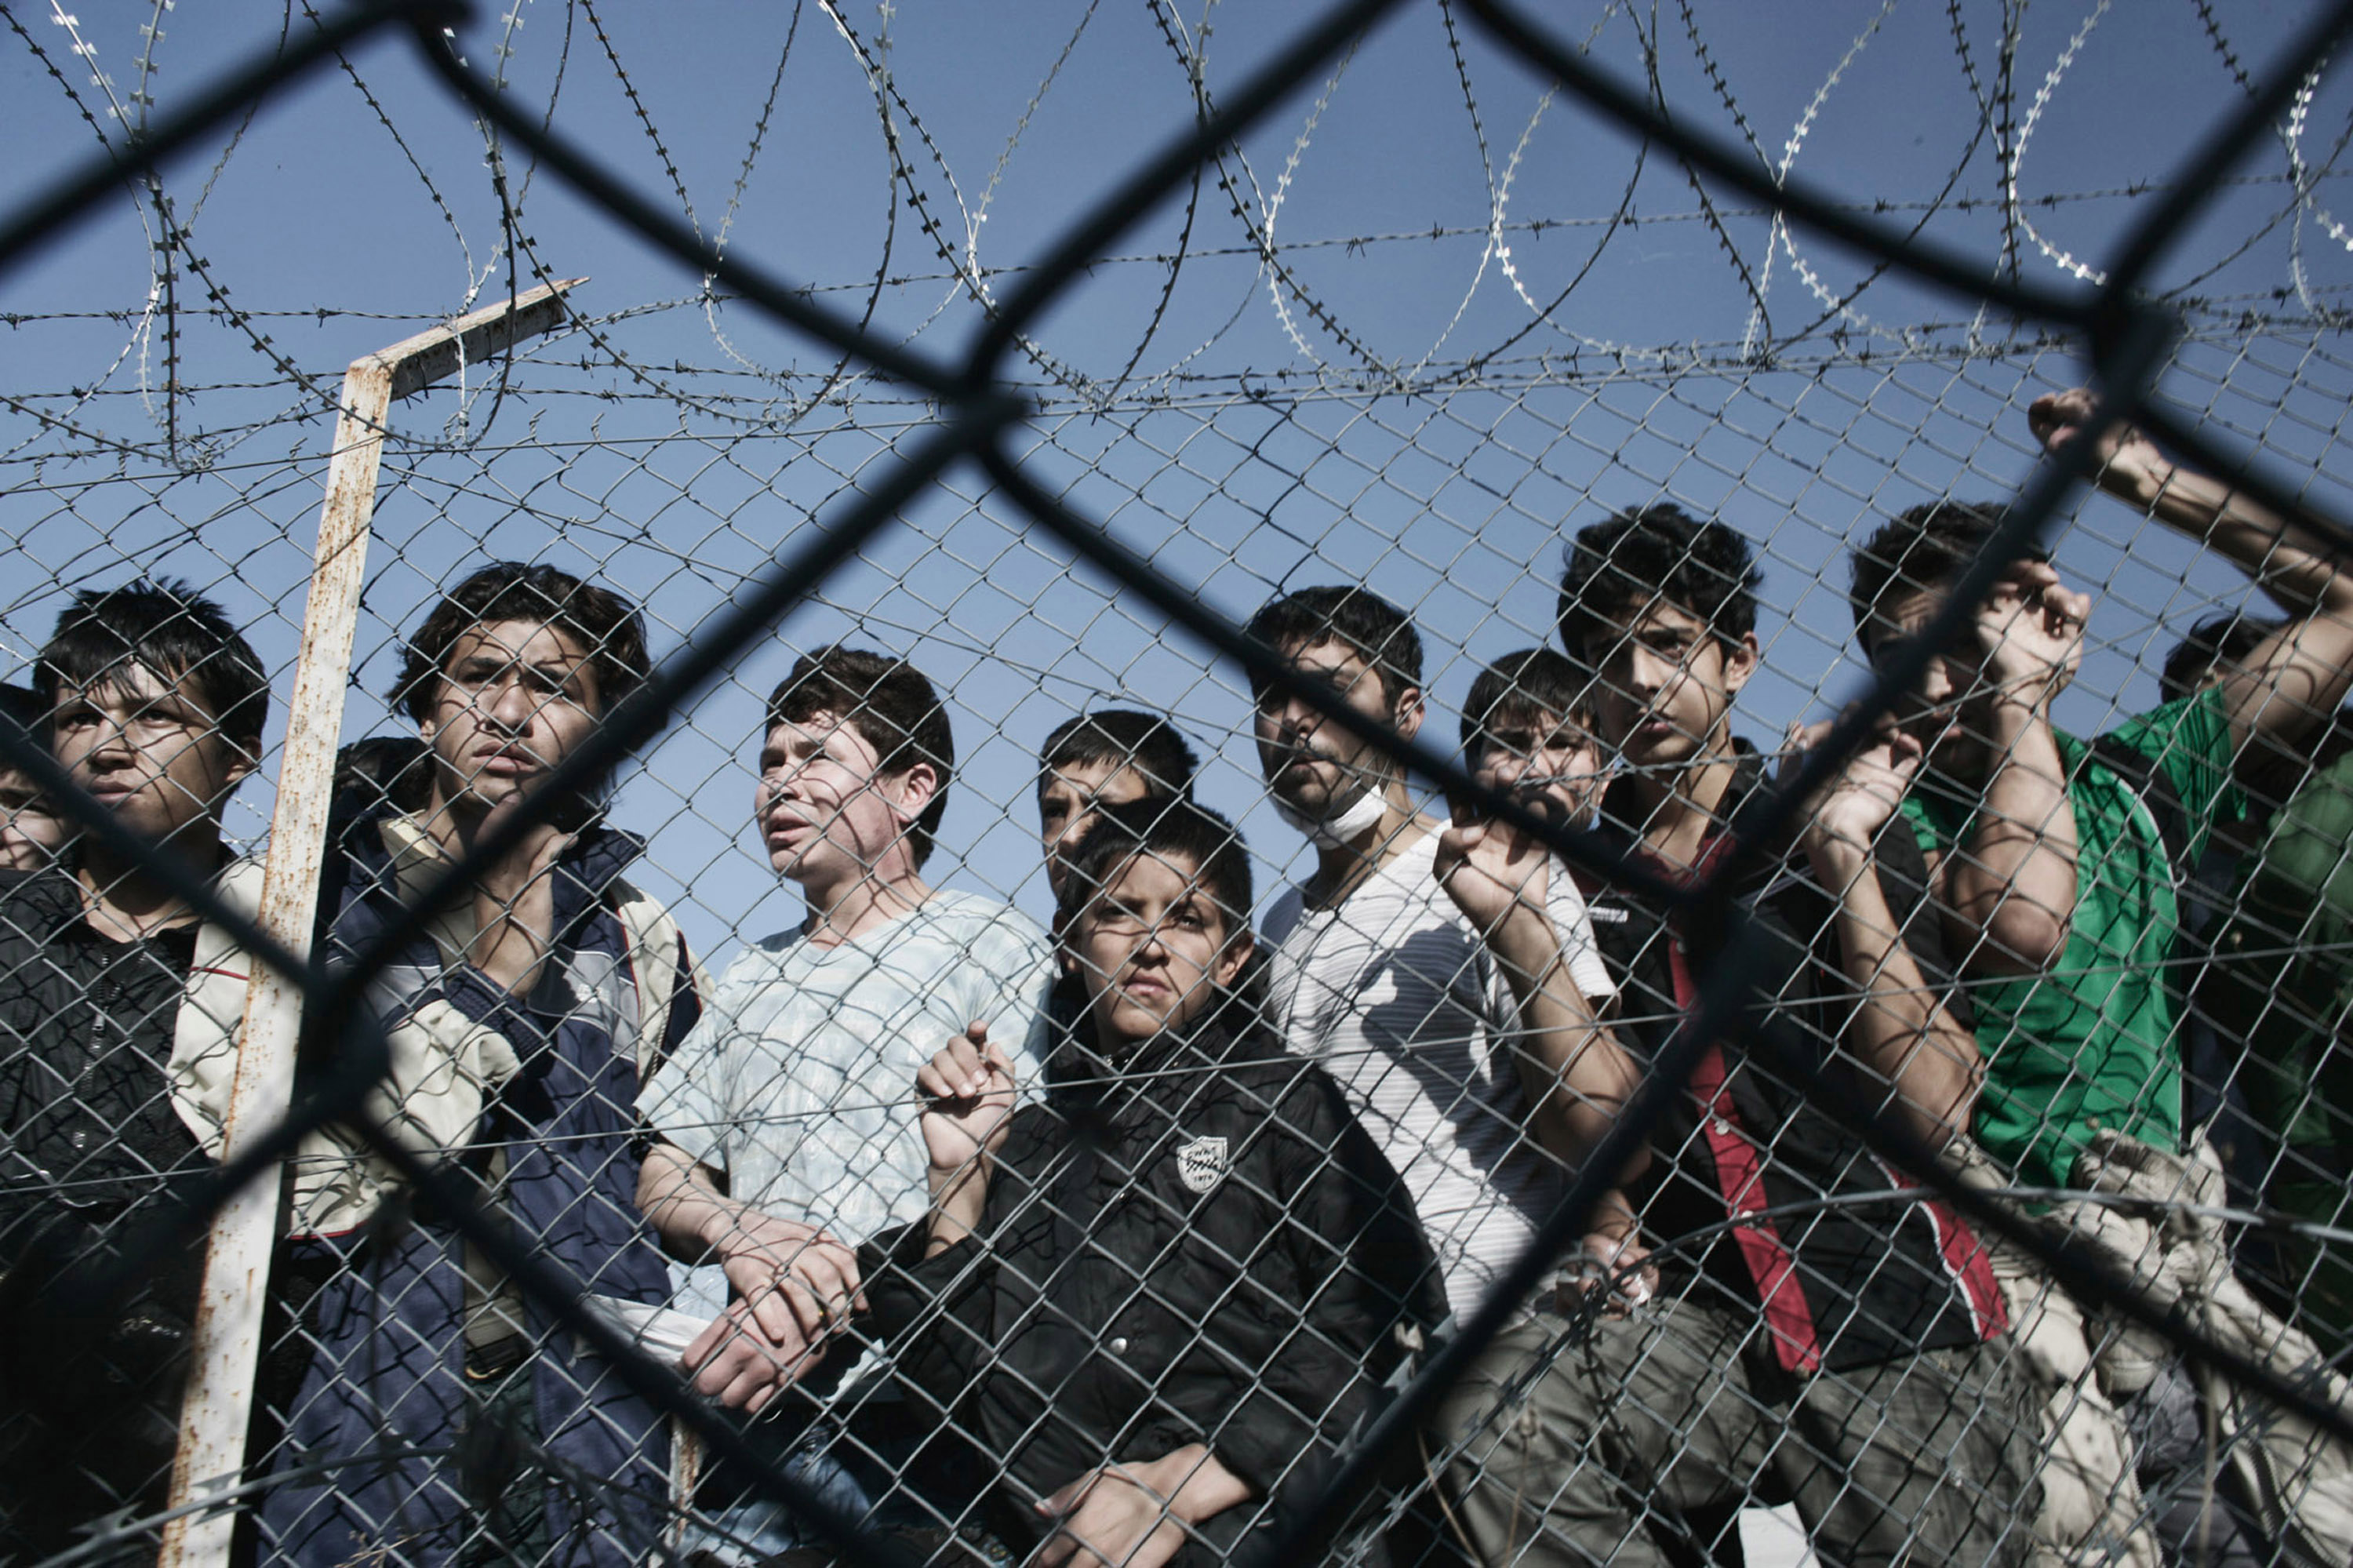 young illegal immigrants standing behind a fence at a detention center, in the Greek village of Filakio near the Greek-Turkish border.